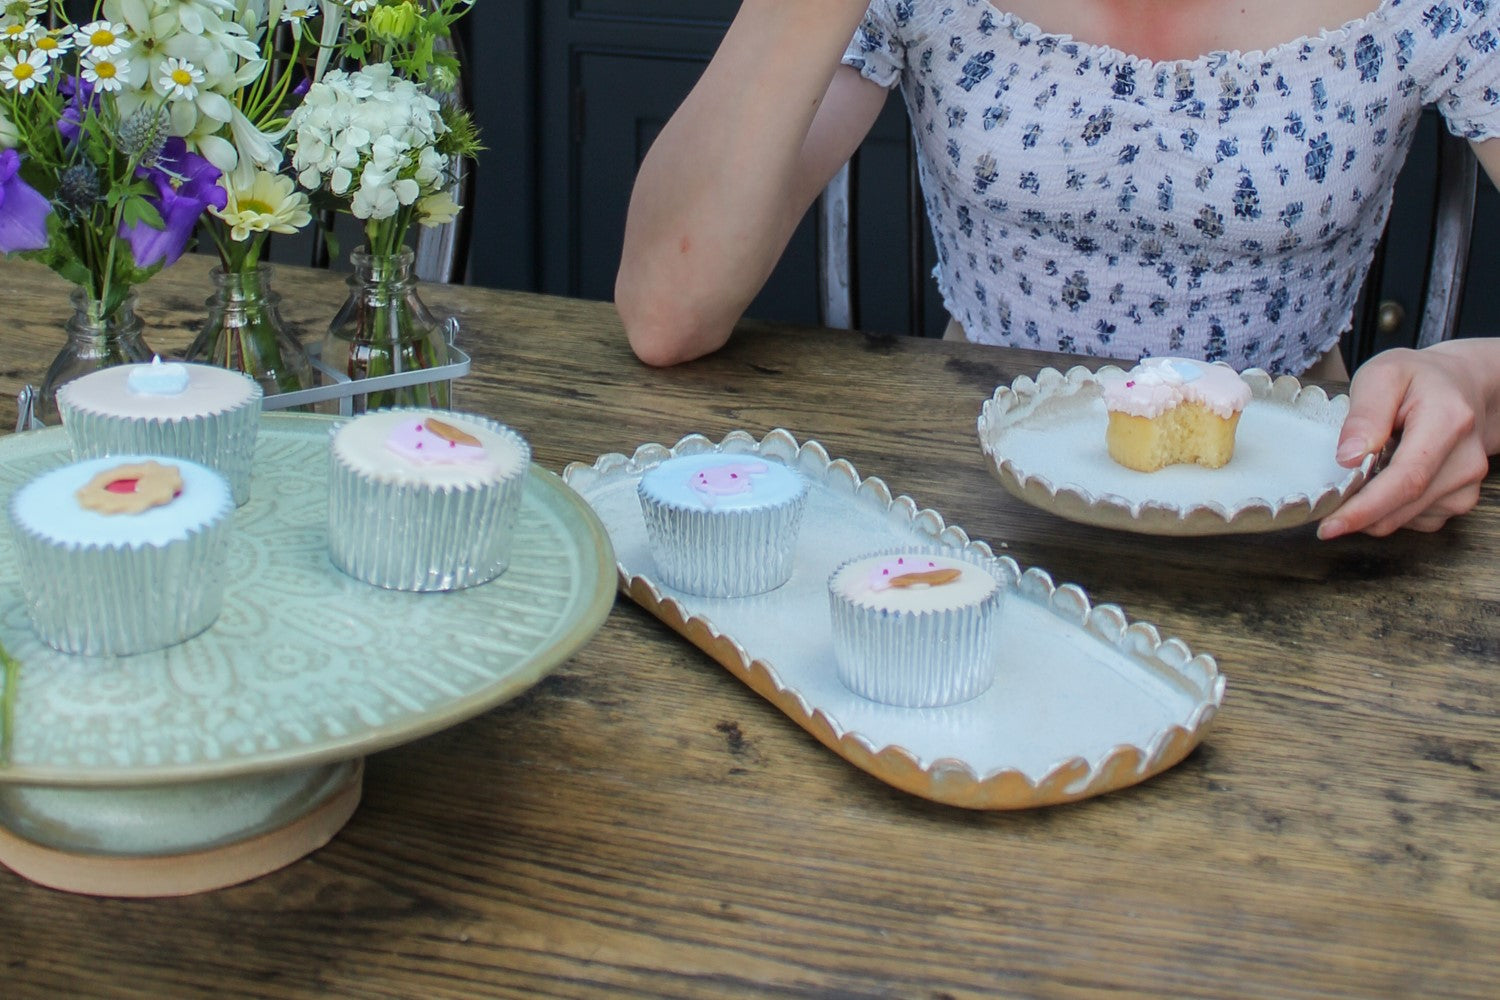 FIVE ESSENTIALS TO HOSTING A TEA-RRIFIC AFTERNOON TEA AT HOME